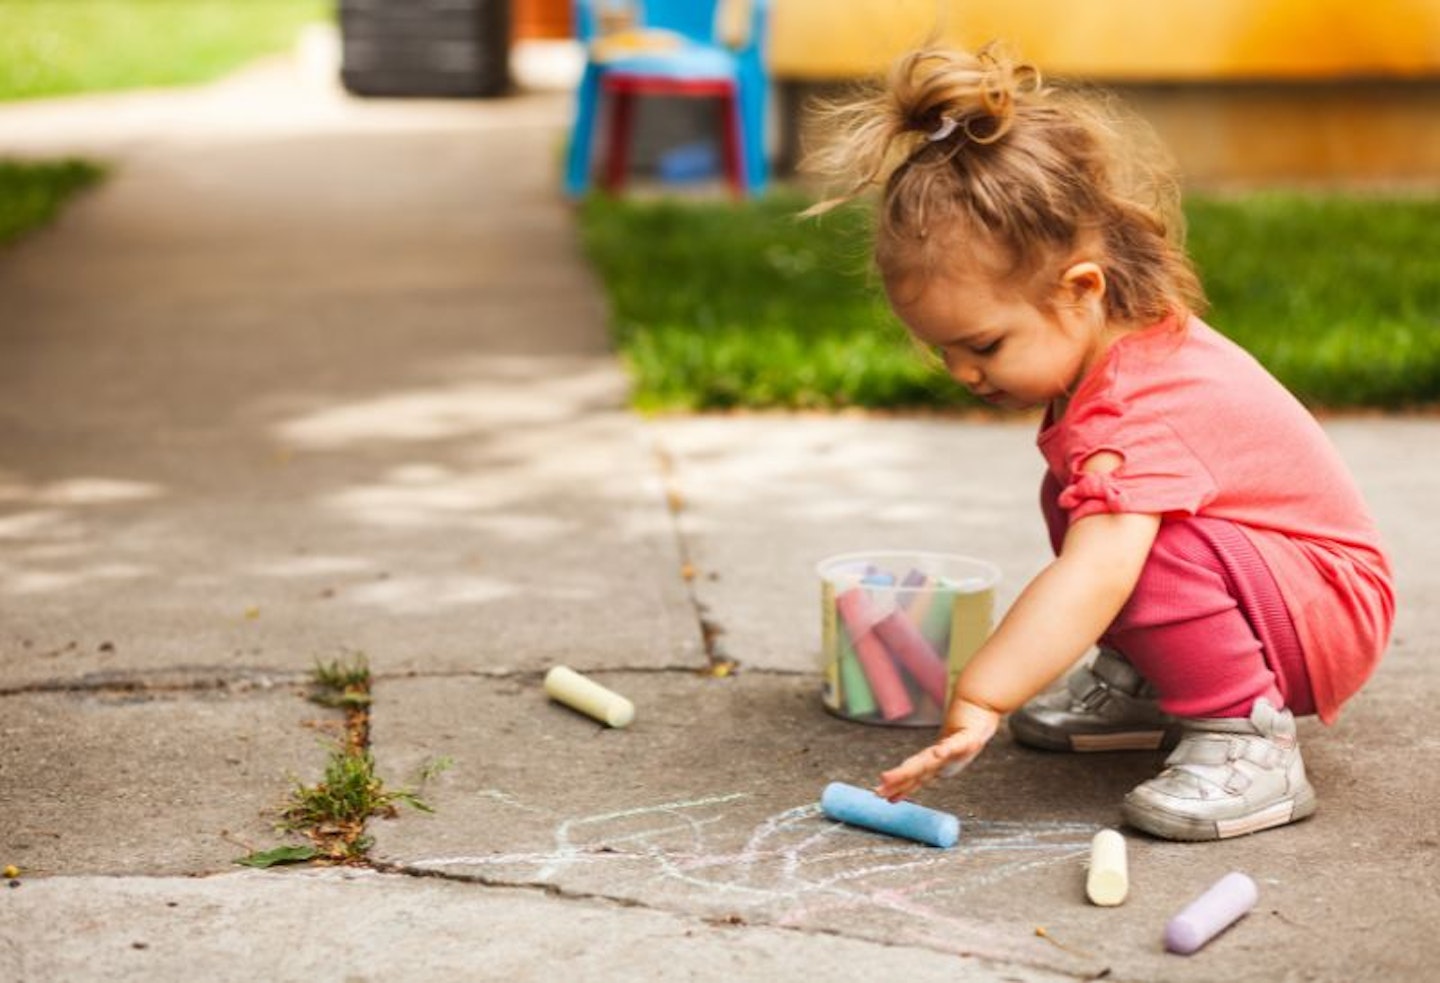 Toddler kneeling and chalk drawing on the flagstones with giant chalk pieces